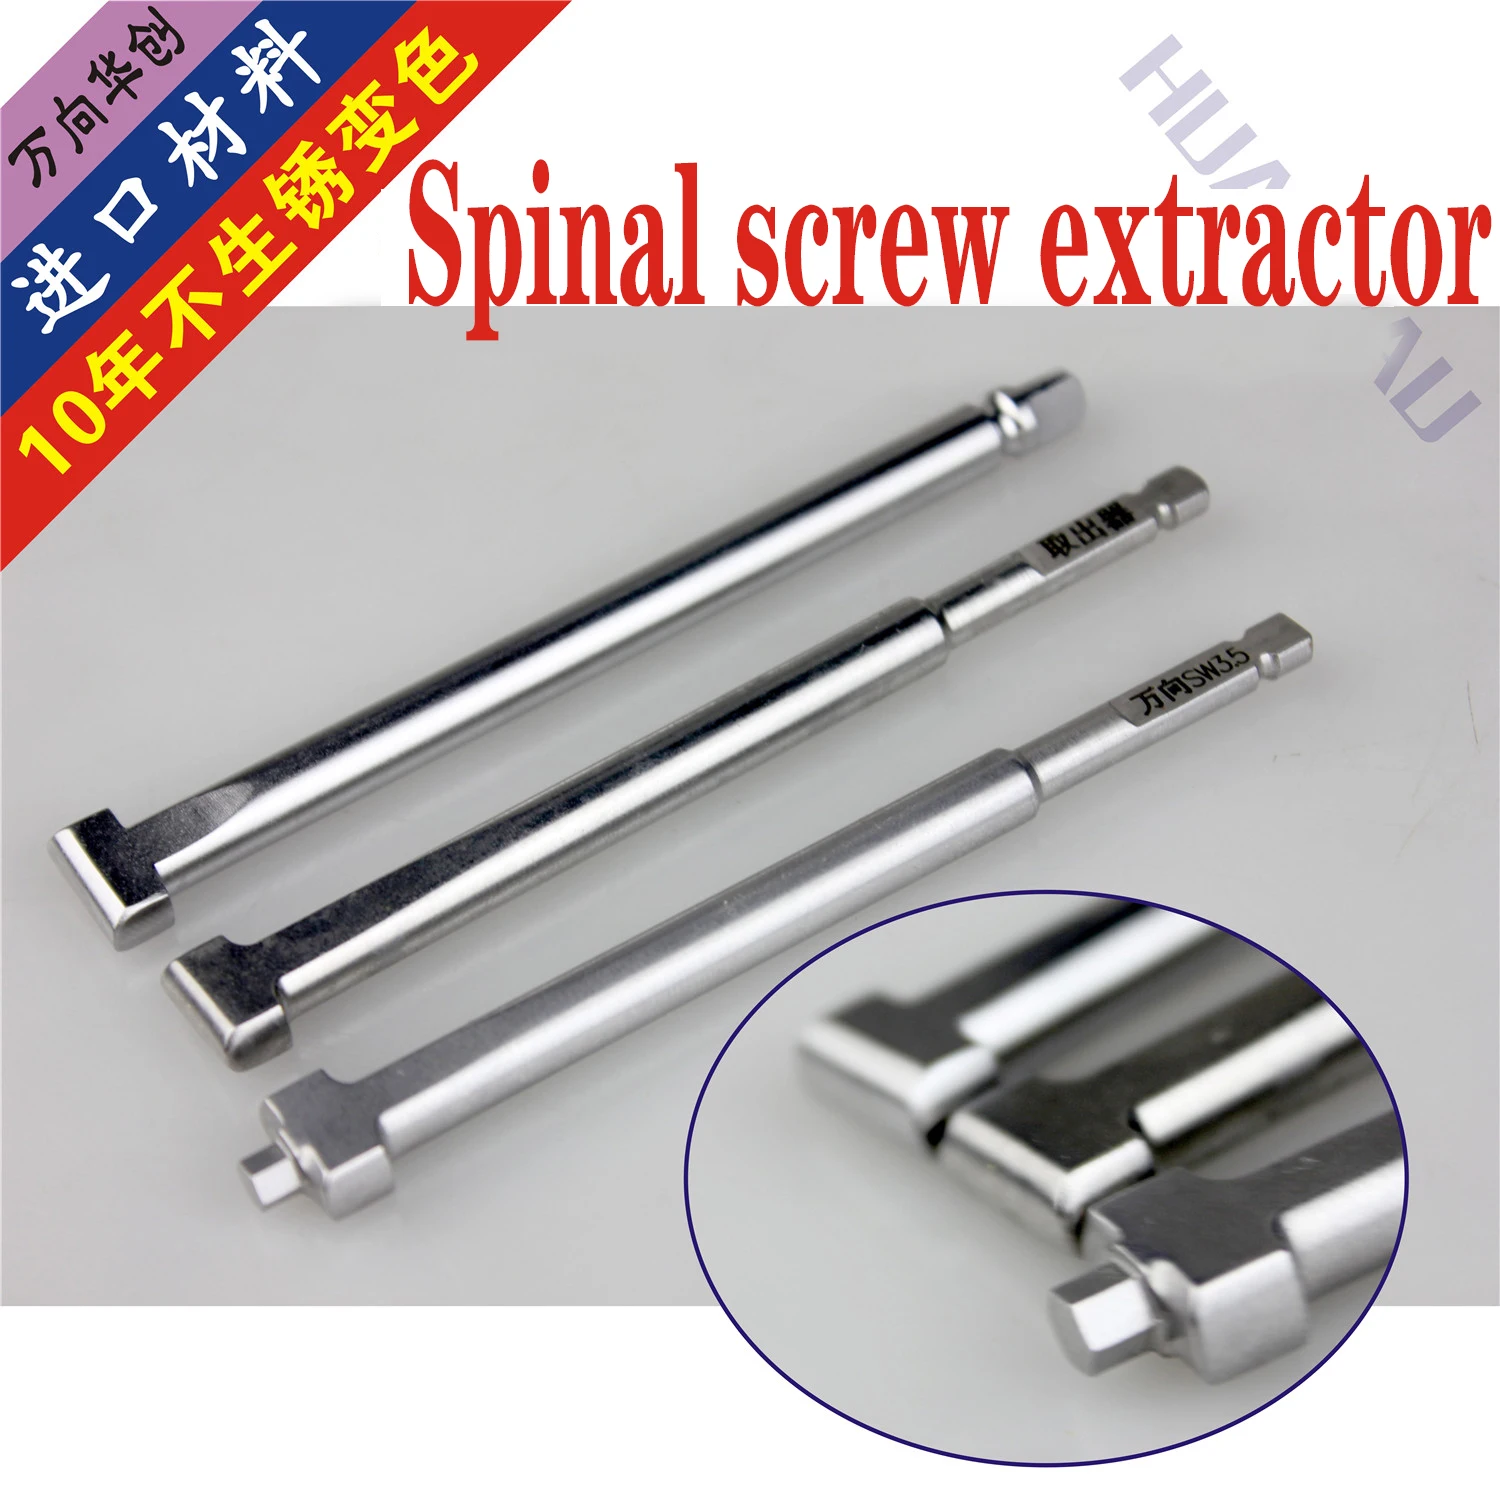 Orthopaedic instruments medical spinal screw extractor single shaft universal pedicle screw driver Ao quick assembly